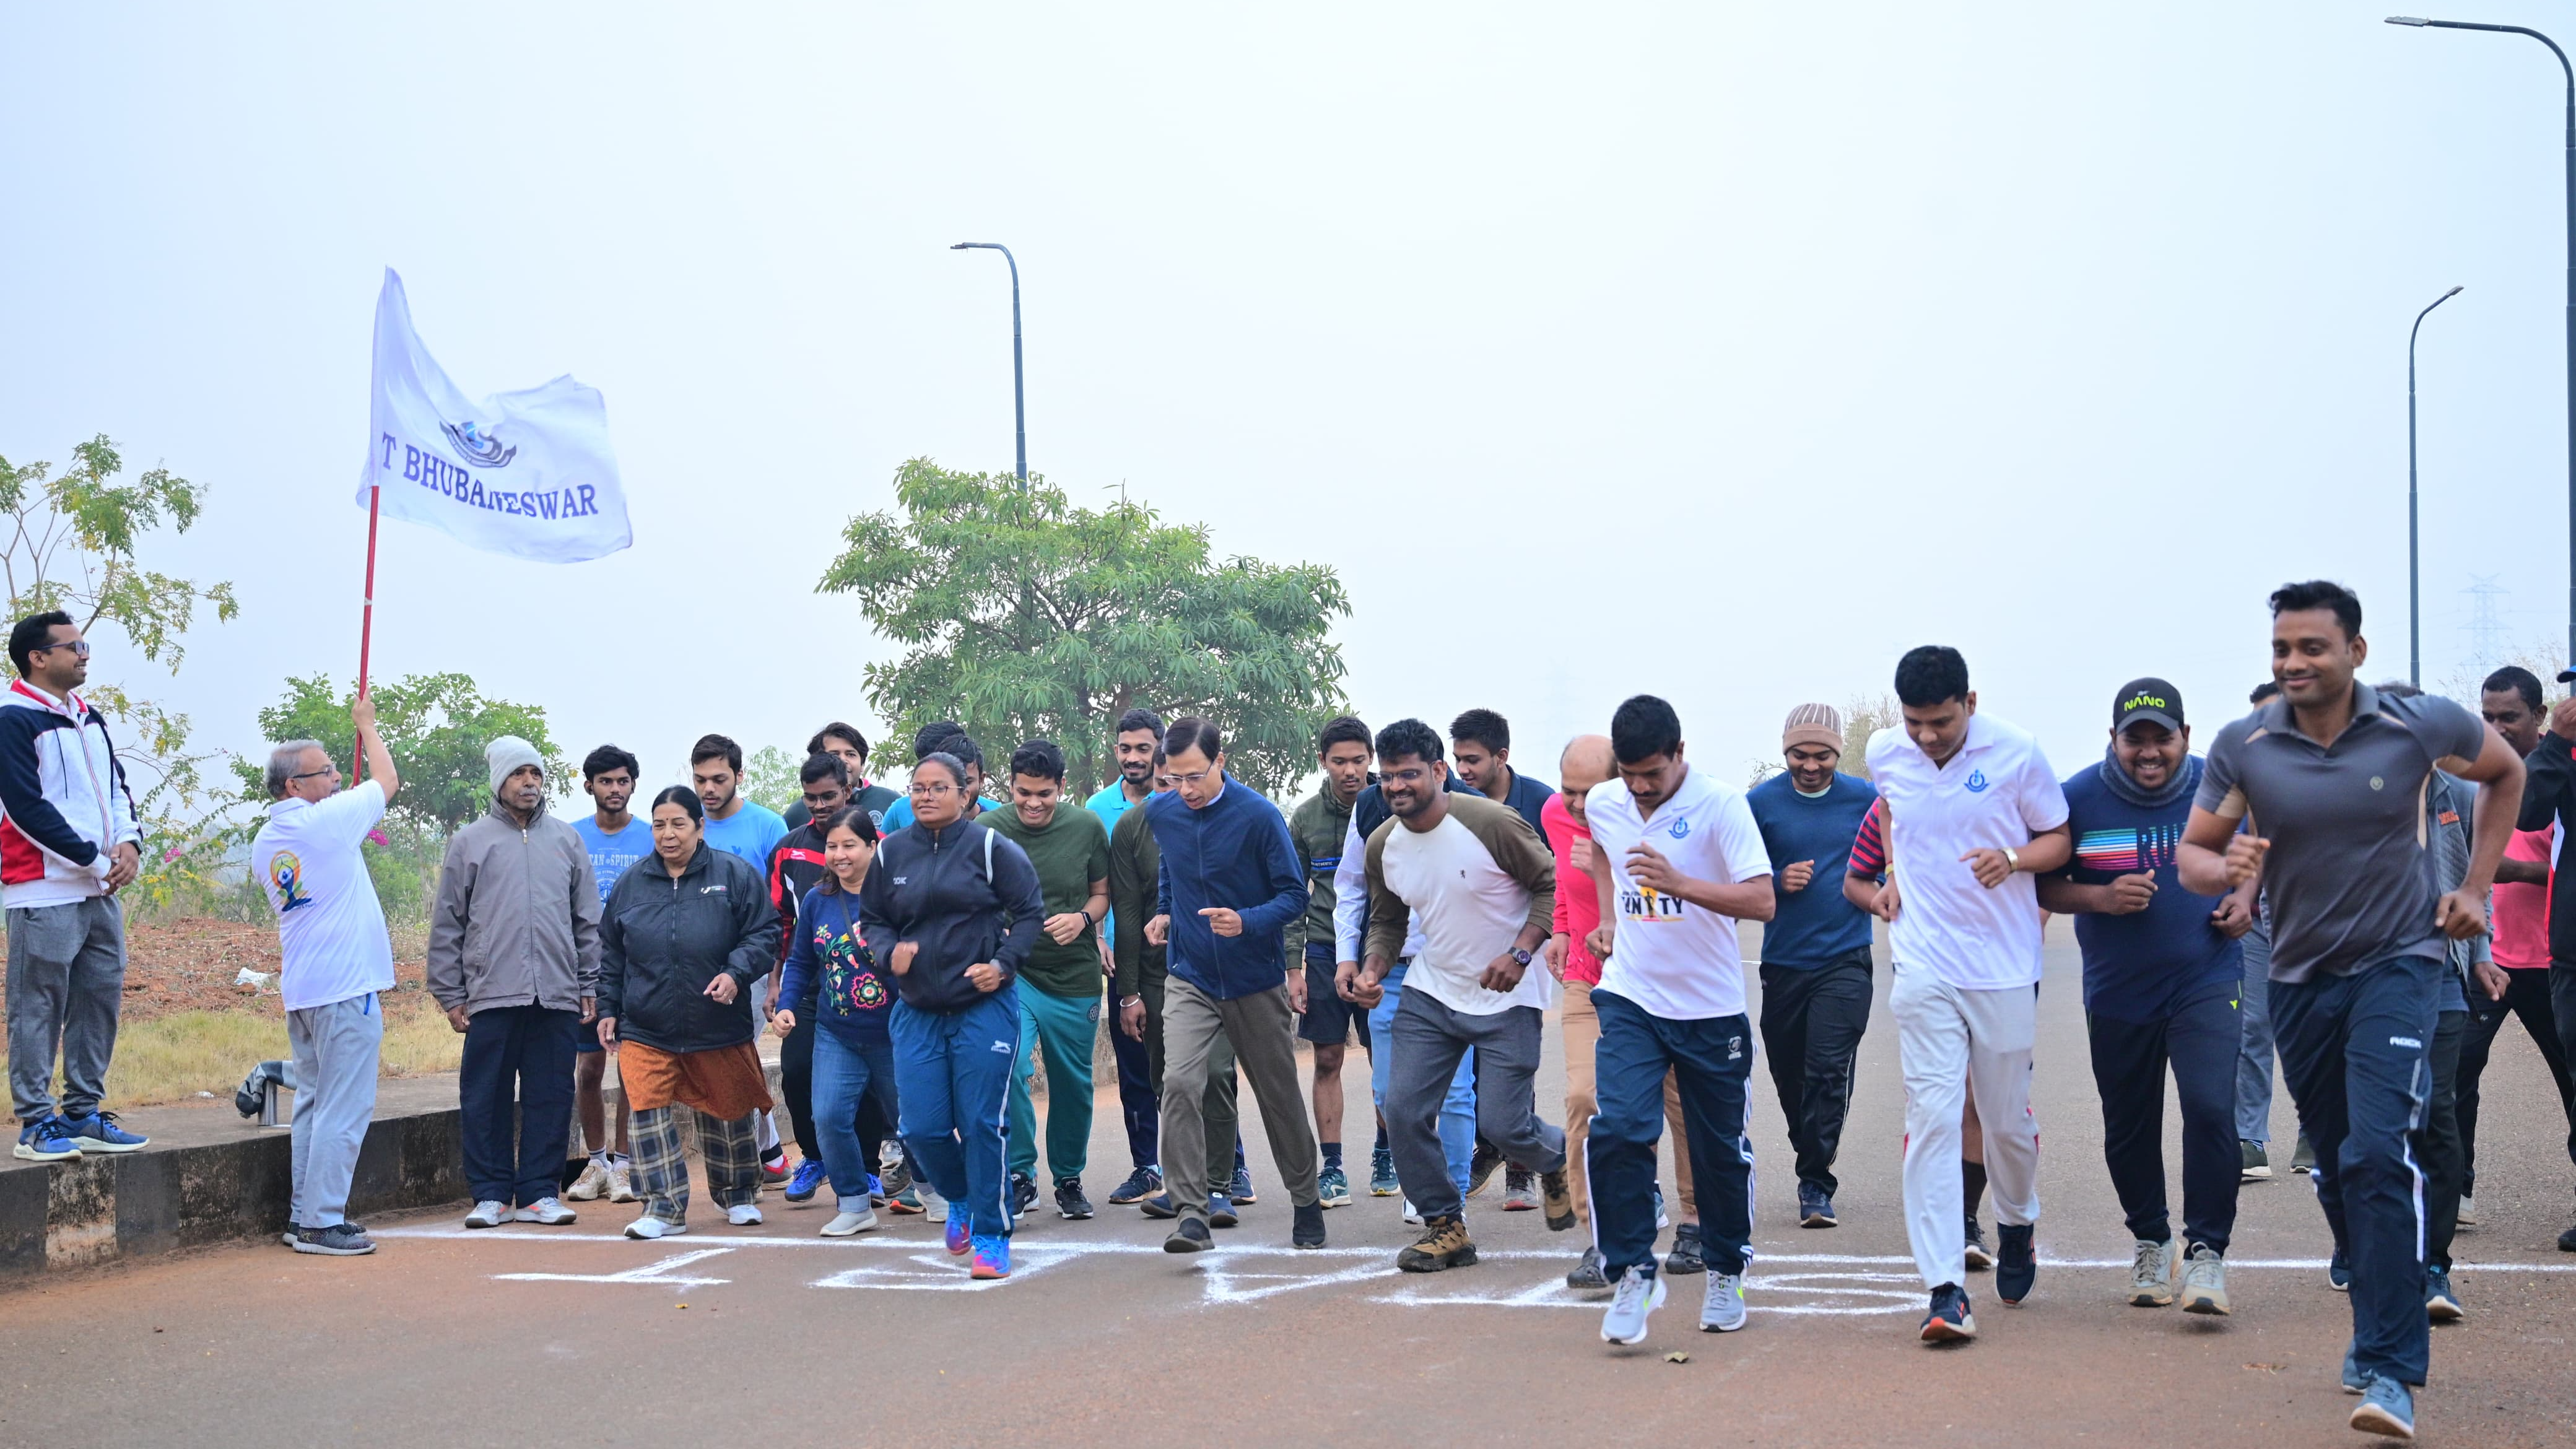 IIT Bhubaneswar organizes an array of sports and fitness activities during Fit India week